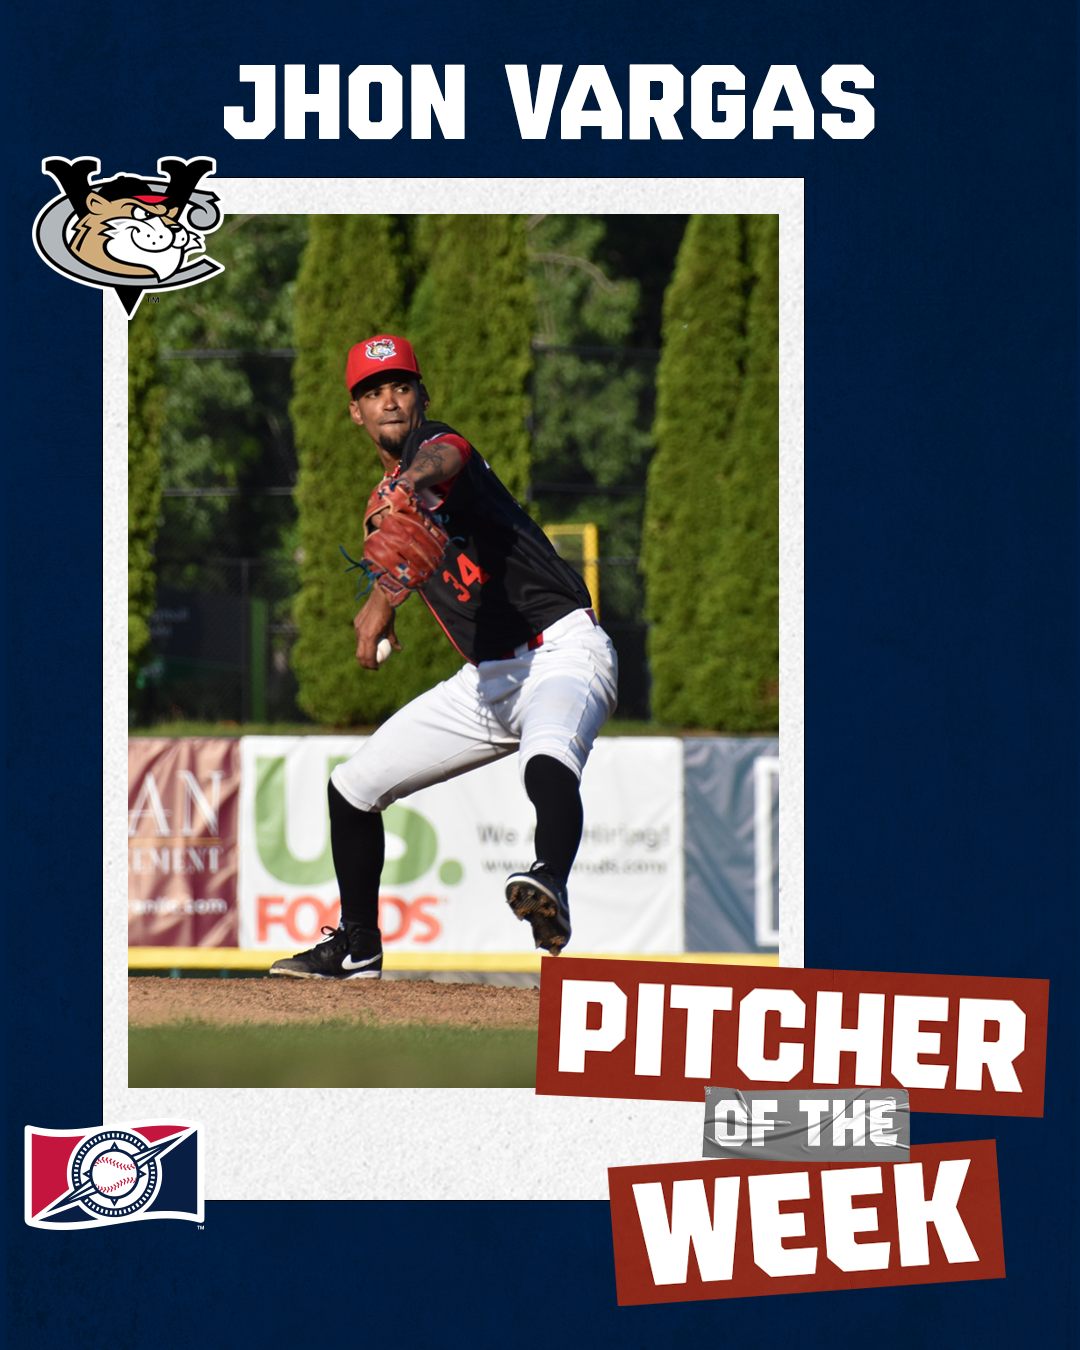 JHON VARGAS WINS PITCHER OF THE WEEK!